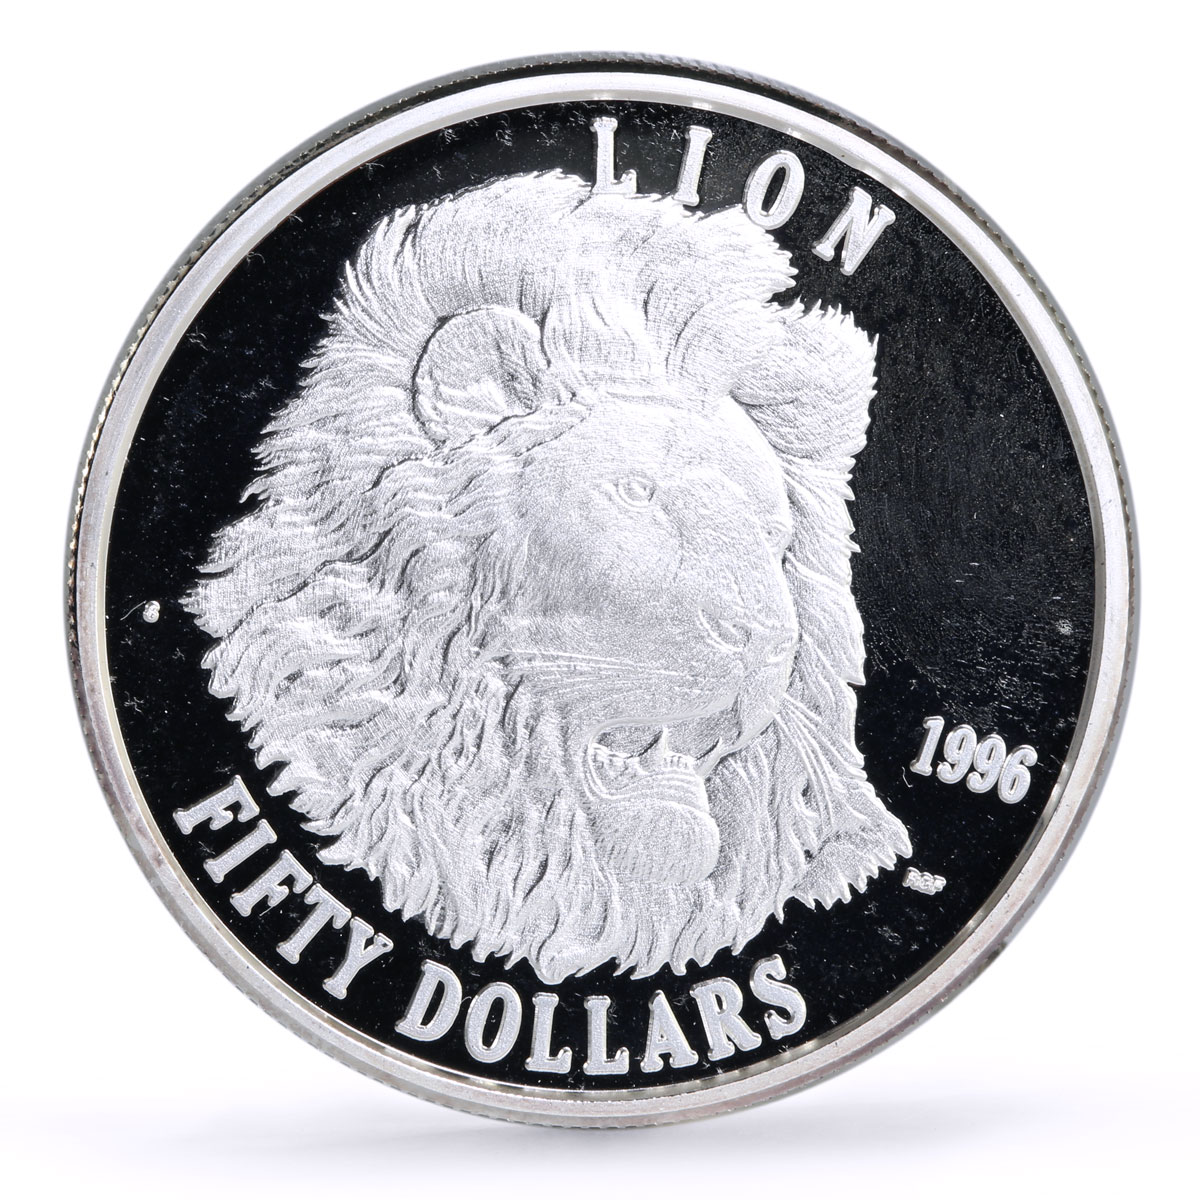 Marshall Islands 50 dollars Conservation Wildlife Lion Fauna silver coin 1996